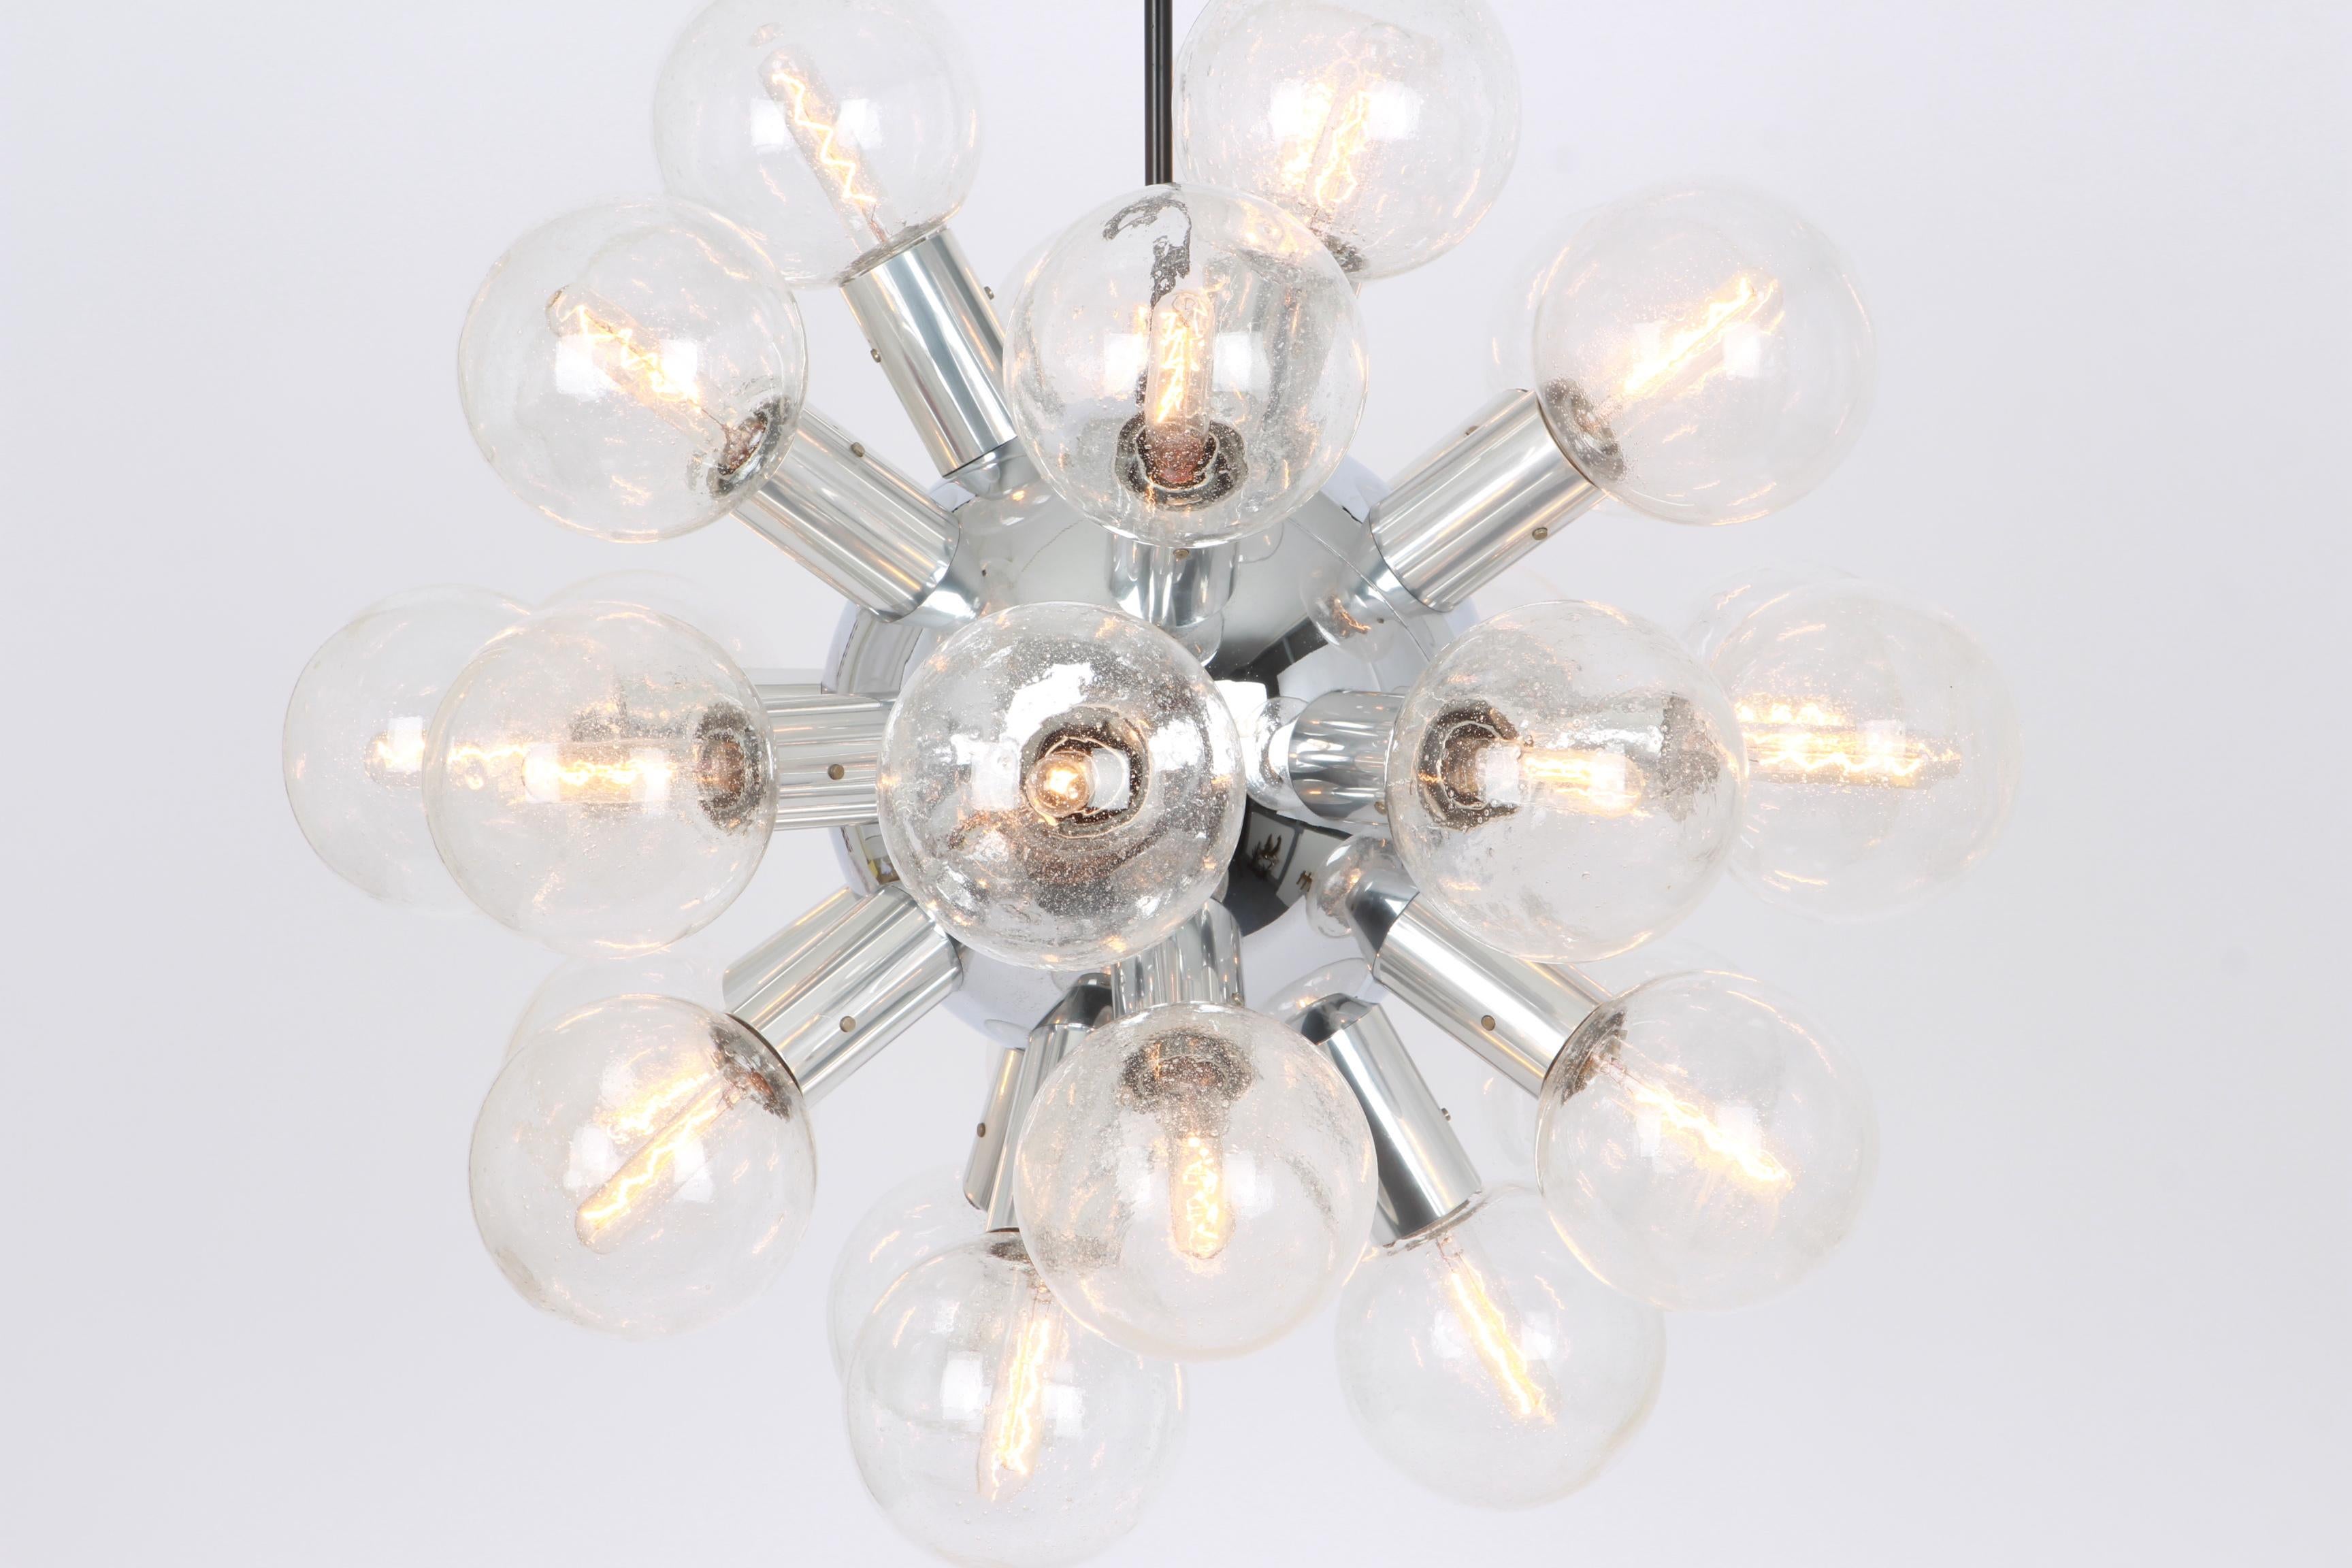 Exclusive Polished aluminum with 27 bubble glasses (mouth-blown)
Stunning Sputnik pendant lamp designed by Kalmar Leuchten during the 1970s.

Sockets: It needs 27x E14 small bulbs.
Light bulbs are not included. It is possible to install this